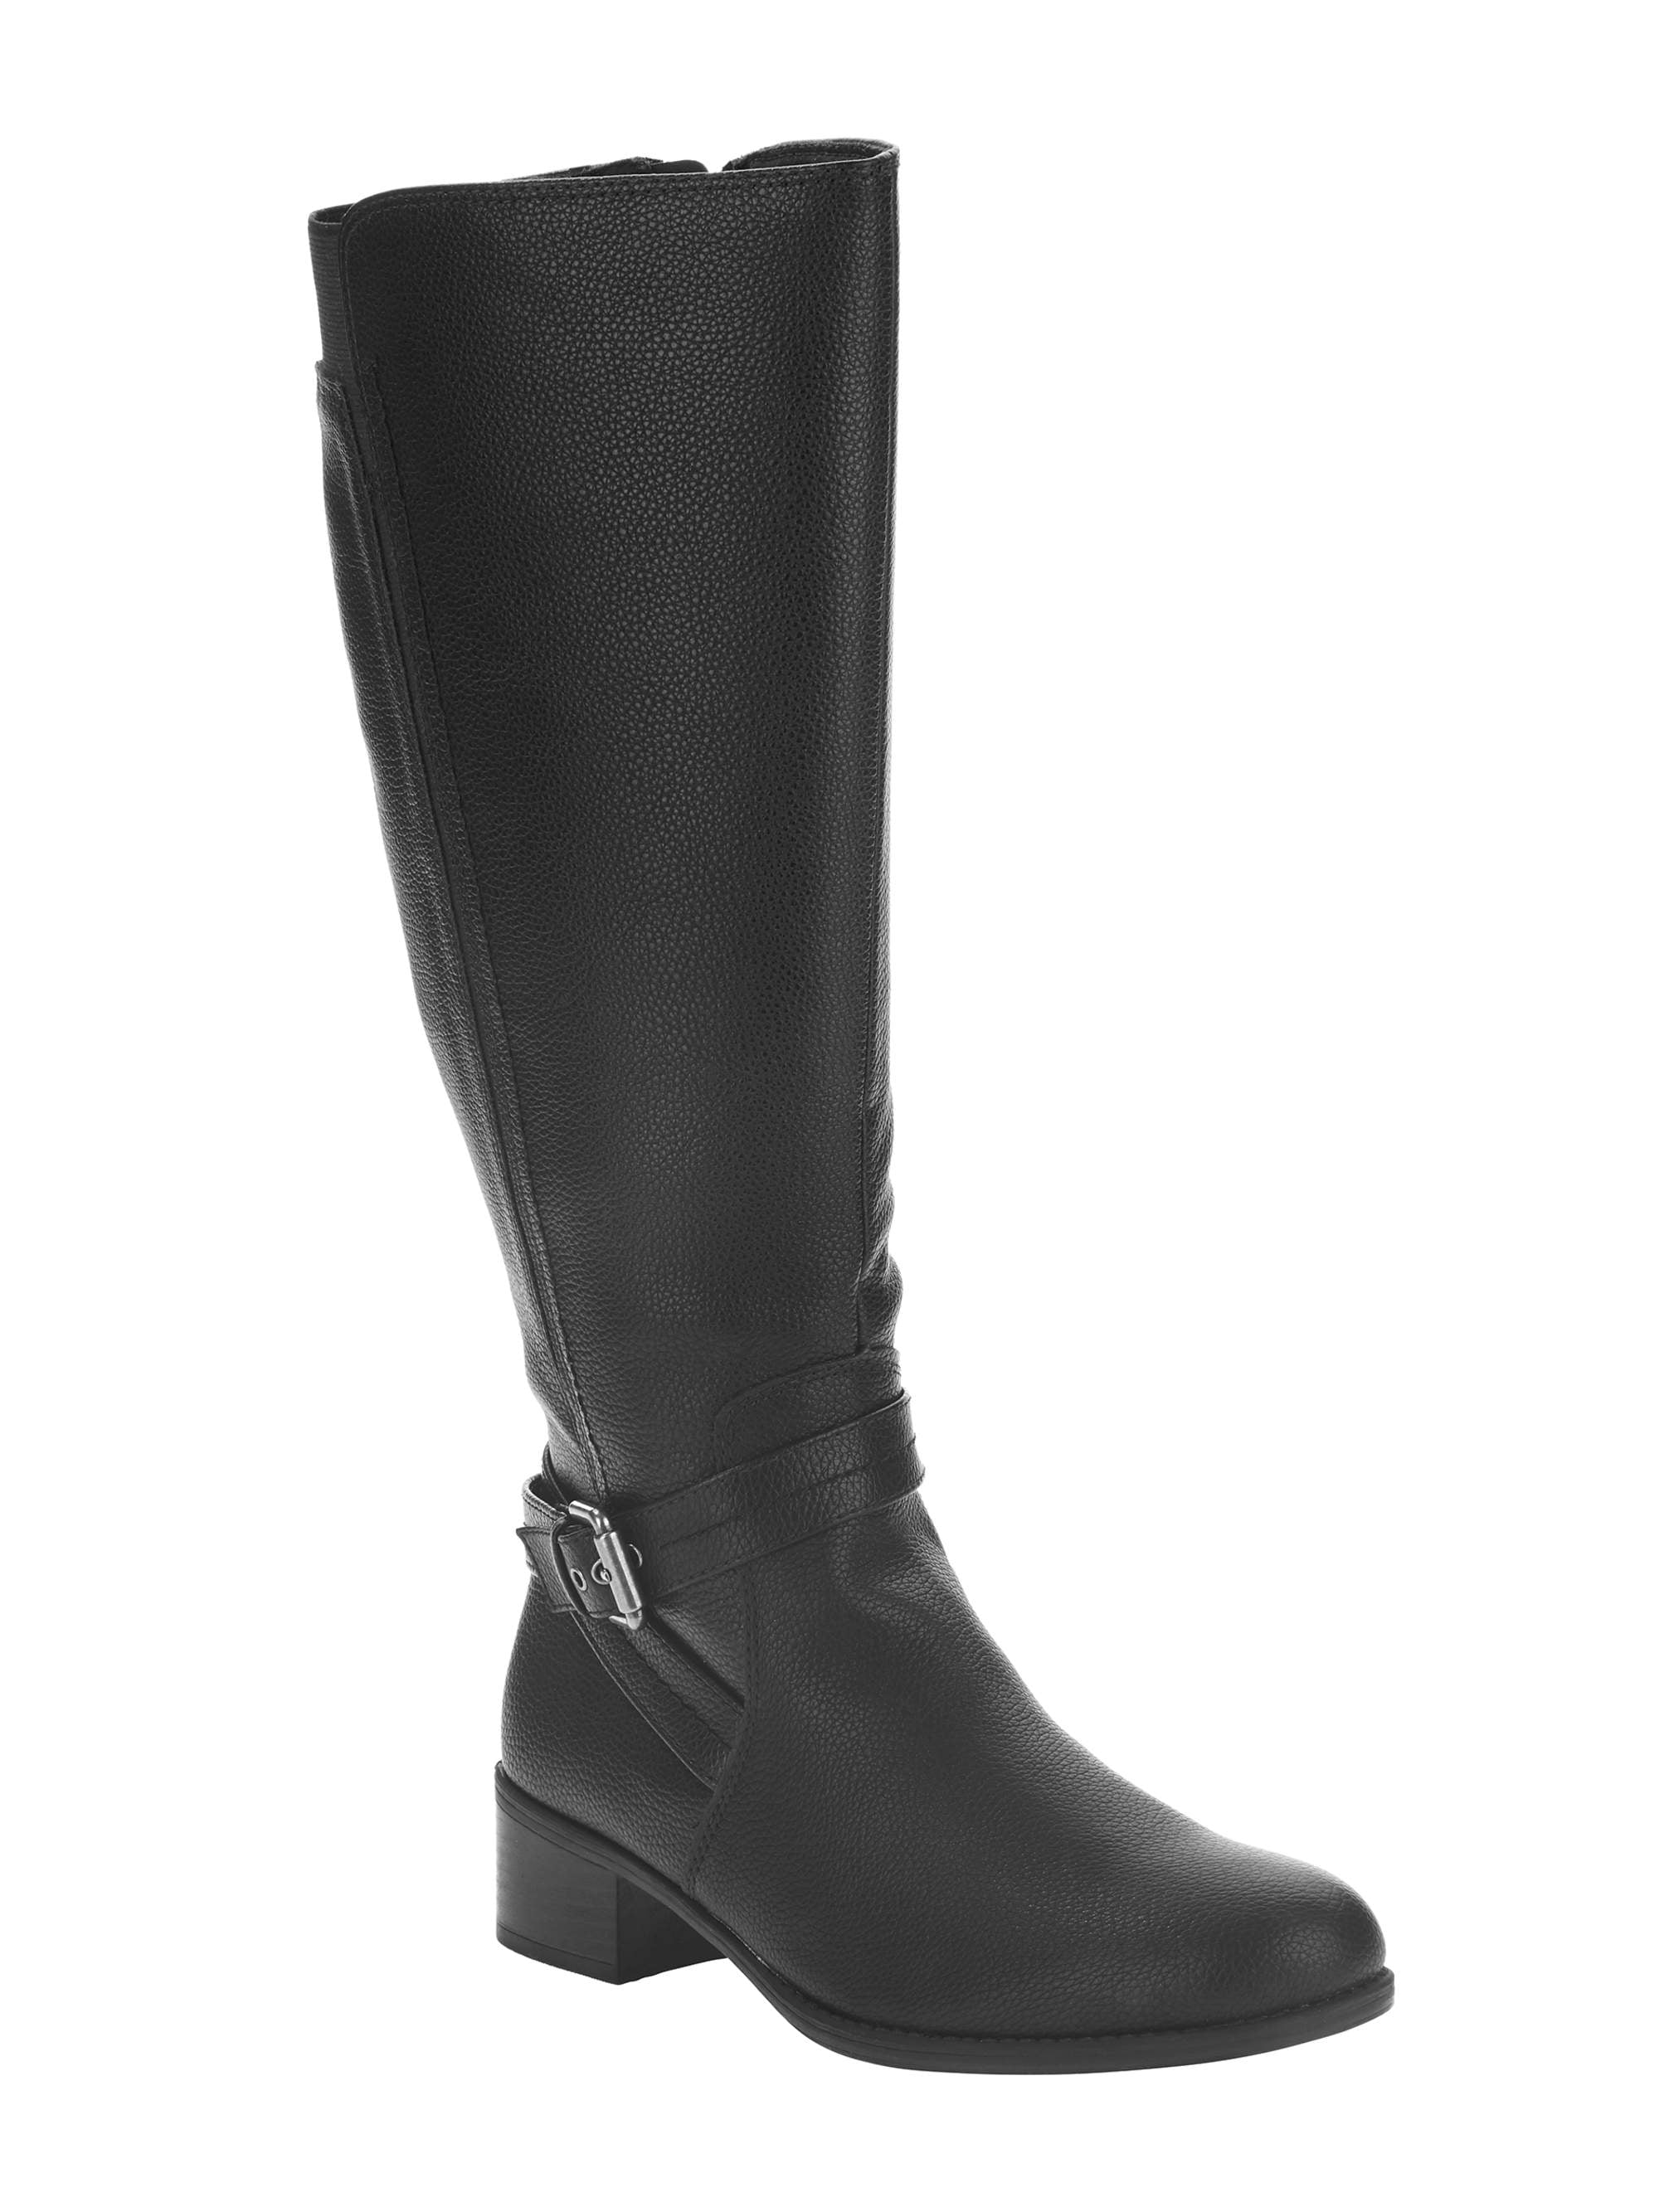 Faded Glory - Women's Riding Boot 